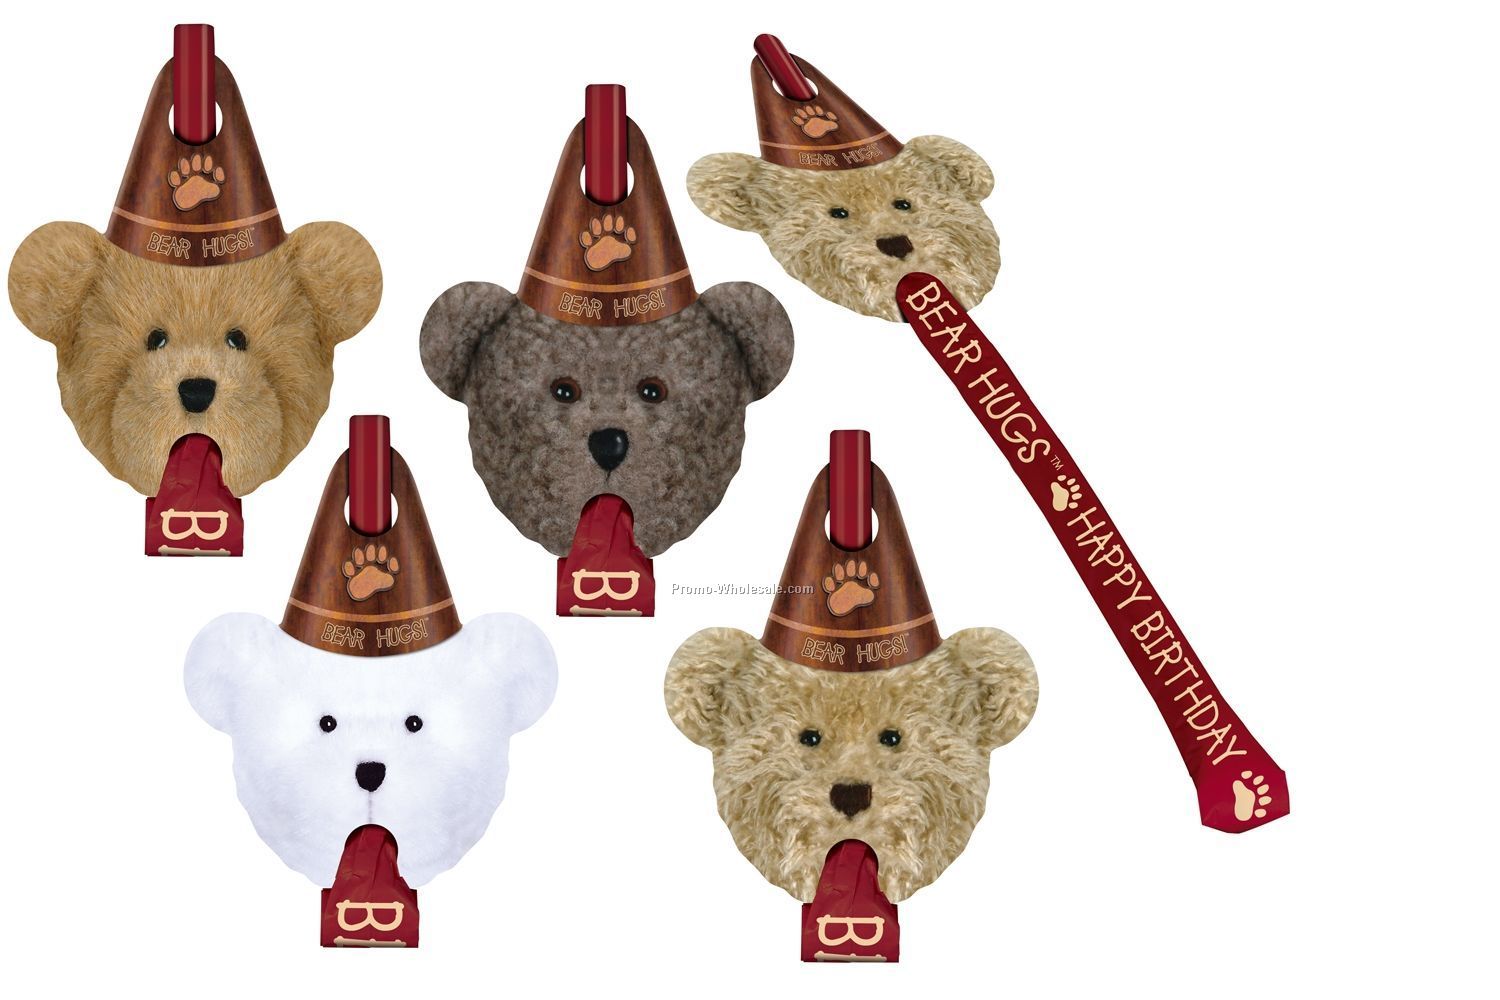 Boyds Bears Bear Hugs Party Accessories - Blowouts